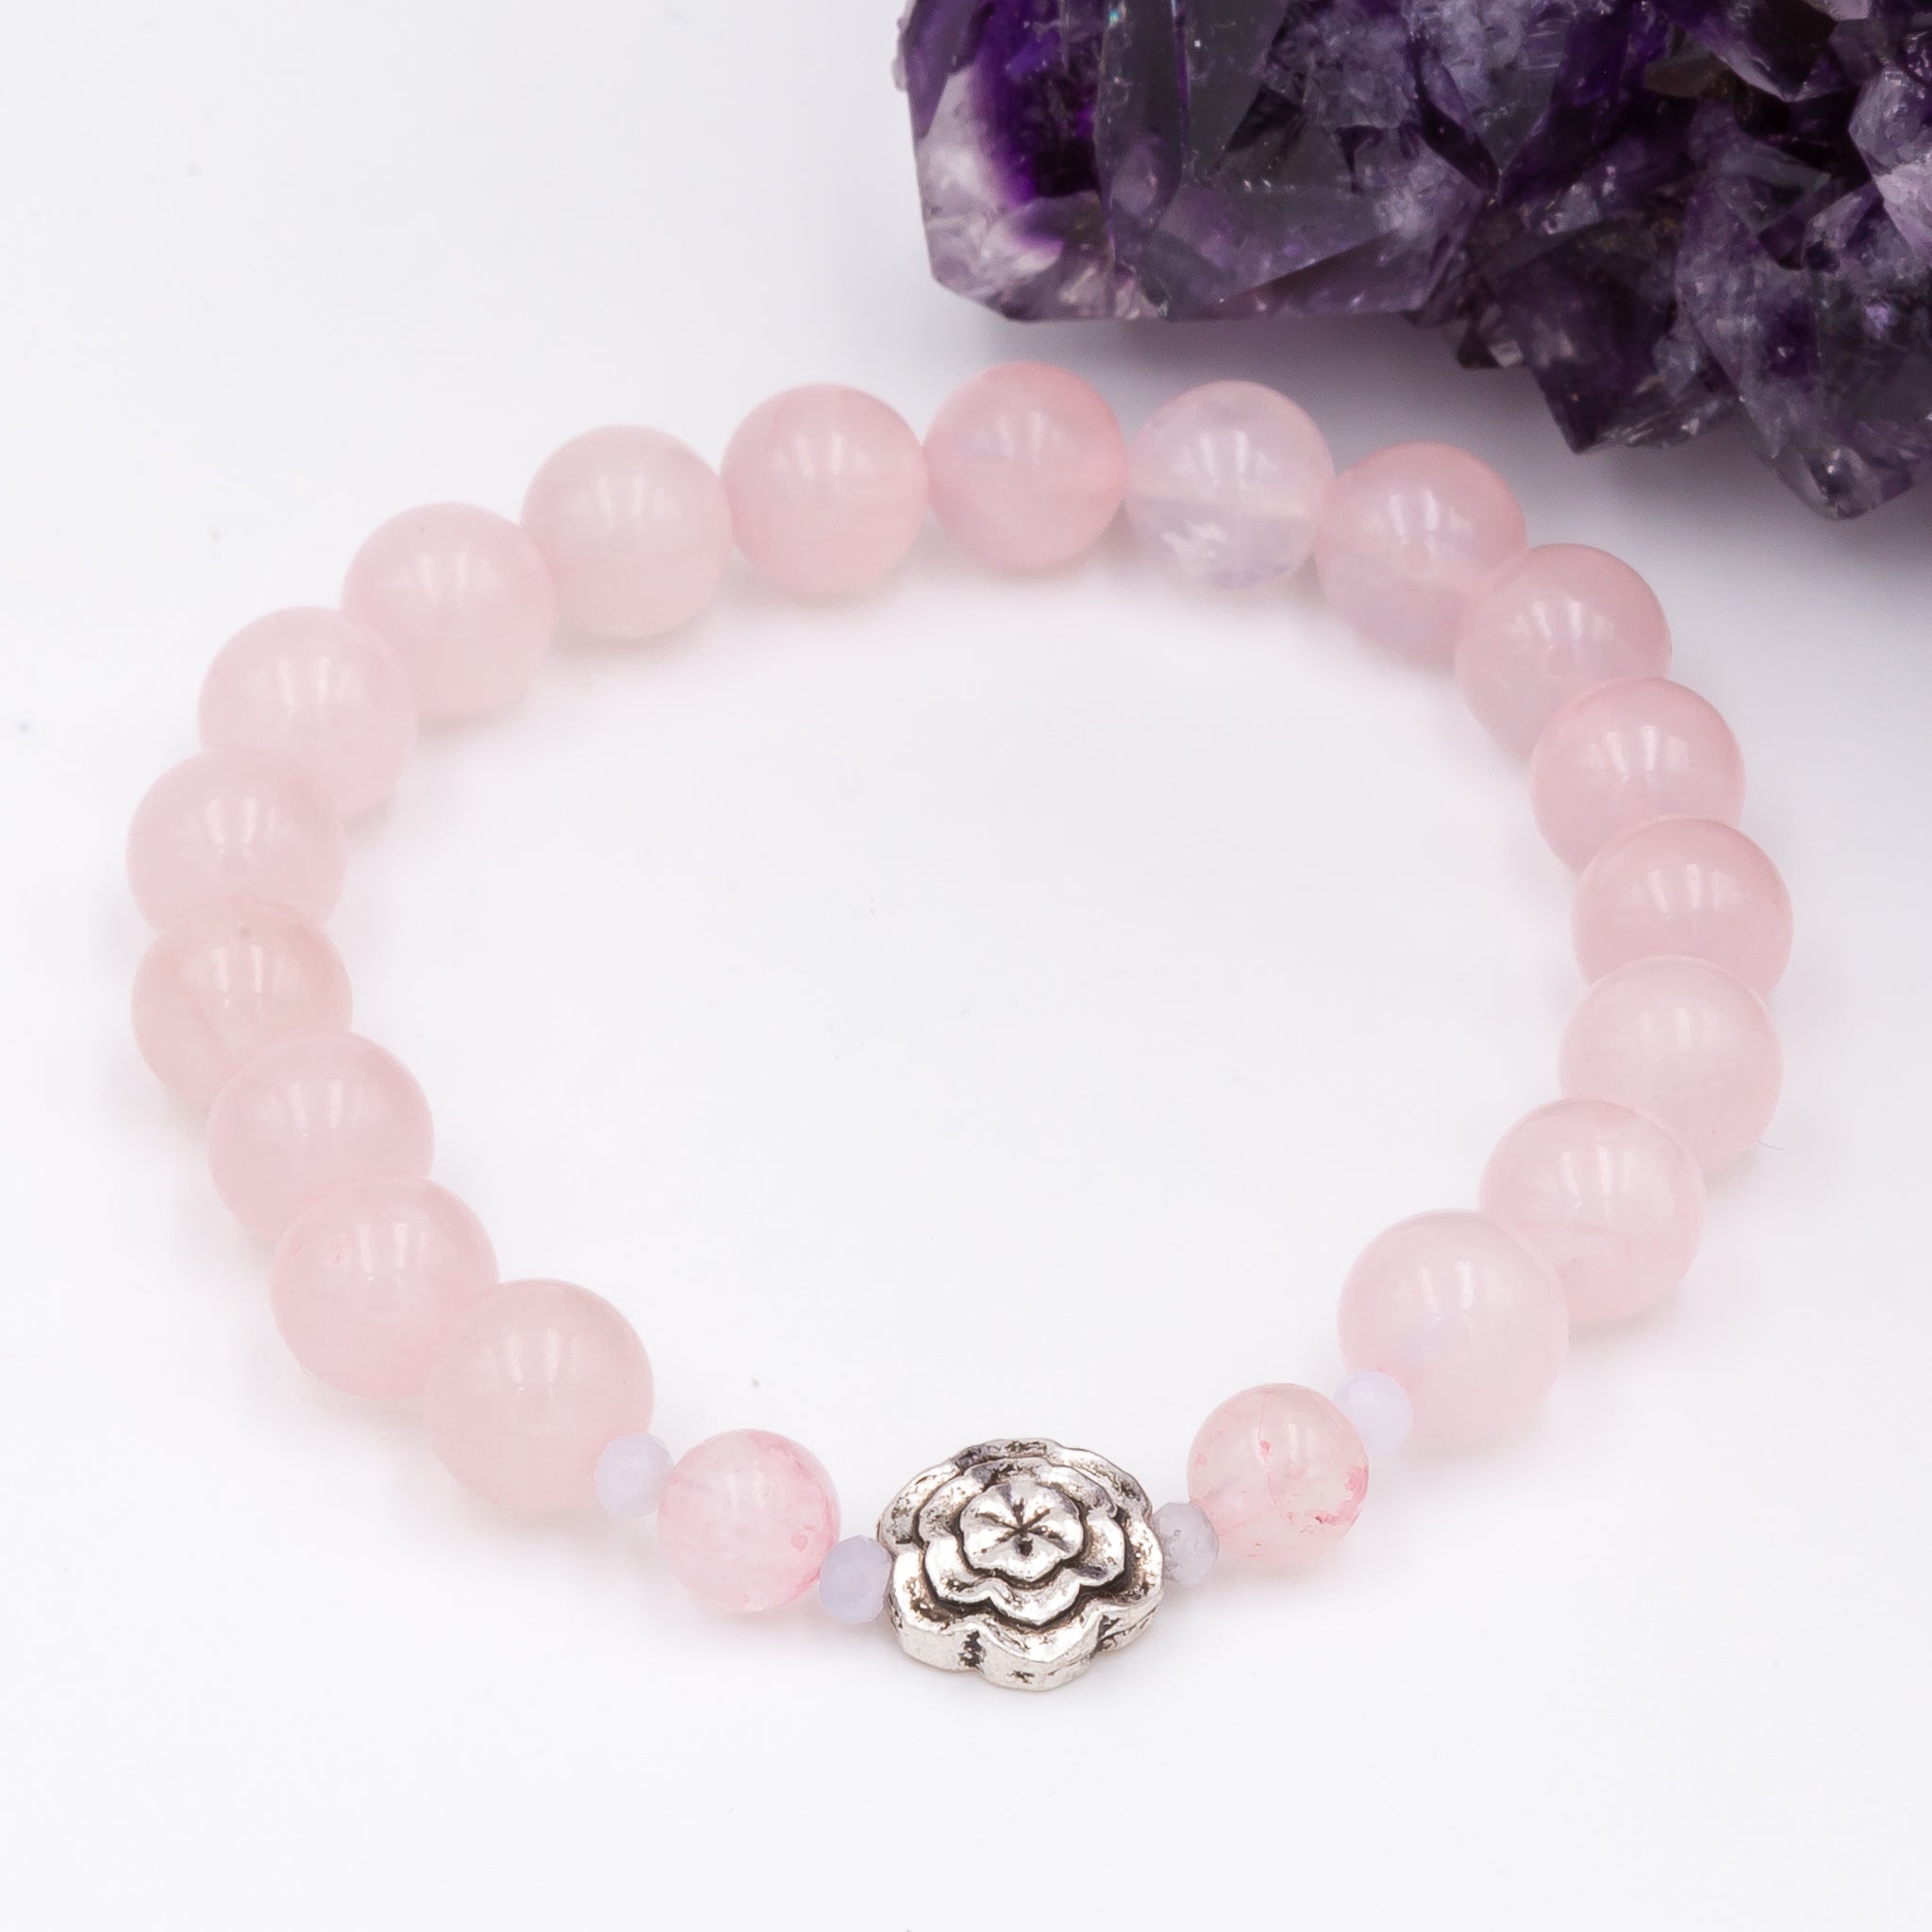 Strawberry Quartz: Meaning and Uses | Conscious Items